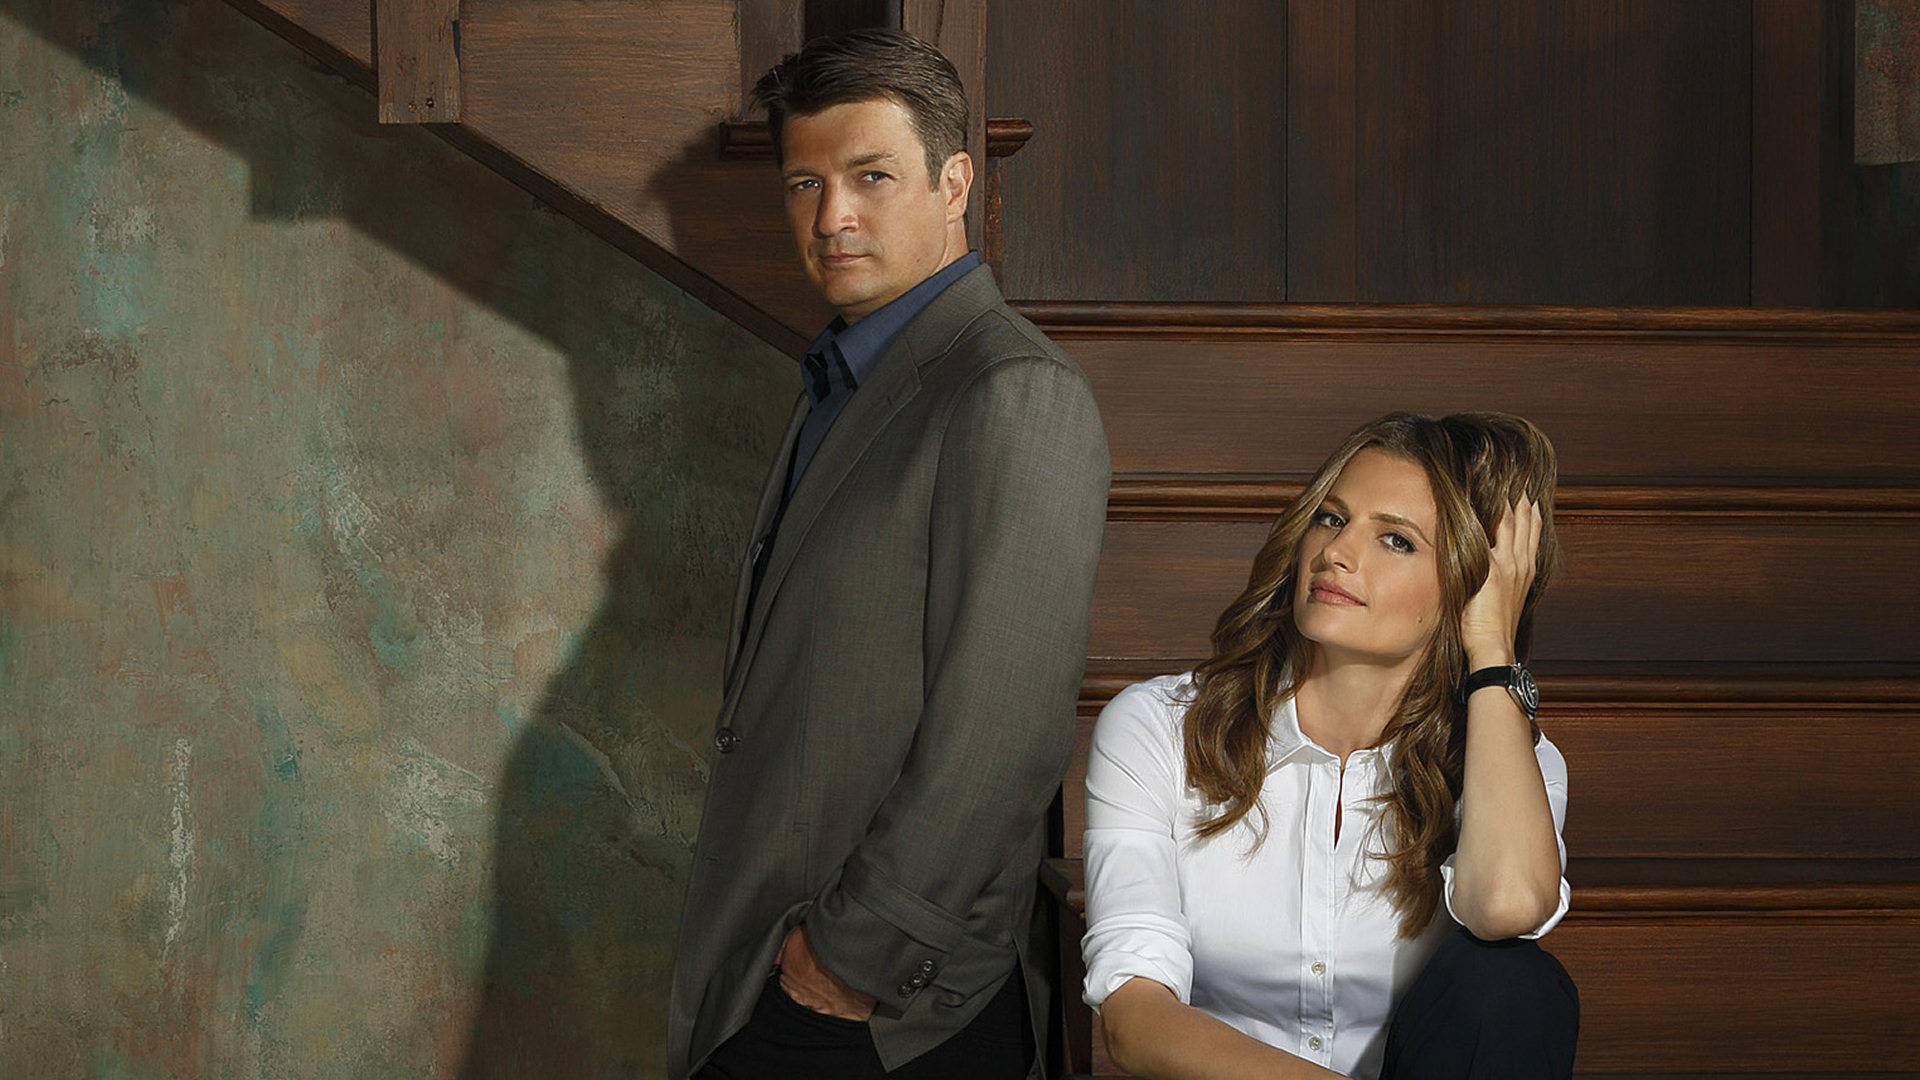 Nathan Fillion Stana Katic Stairs Background